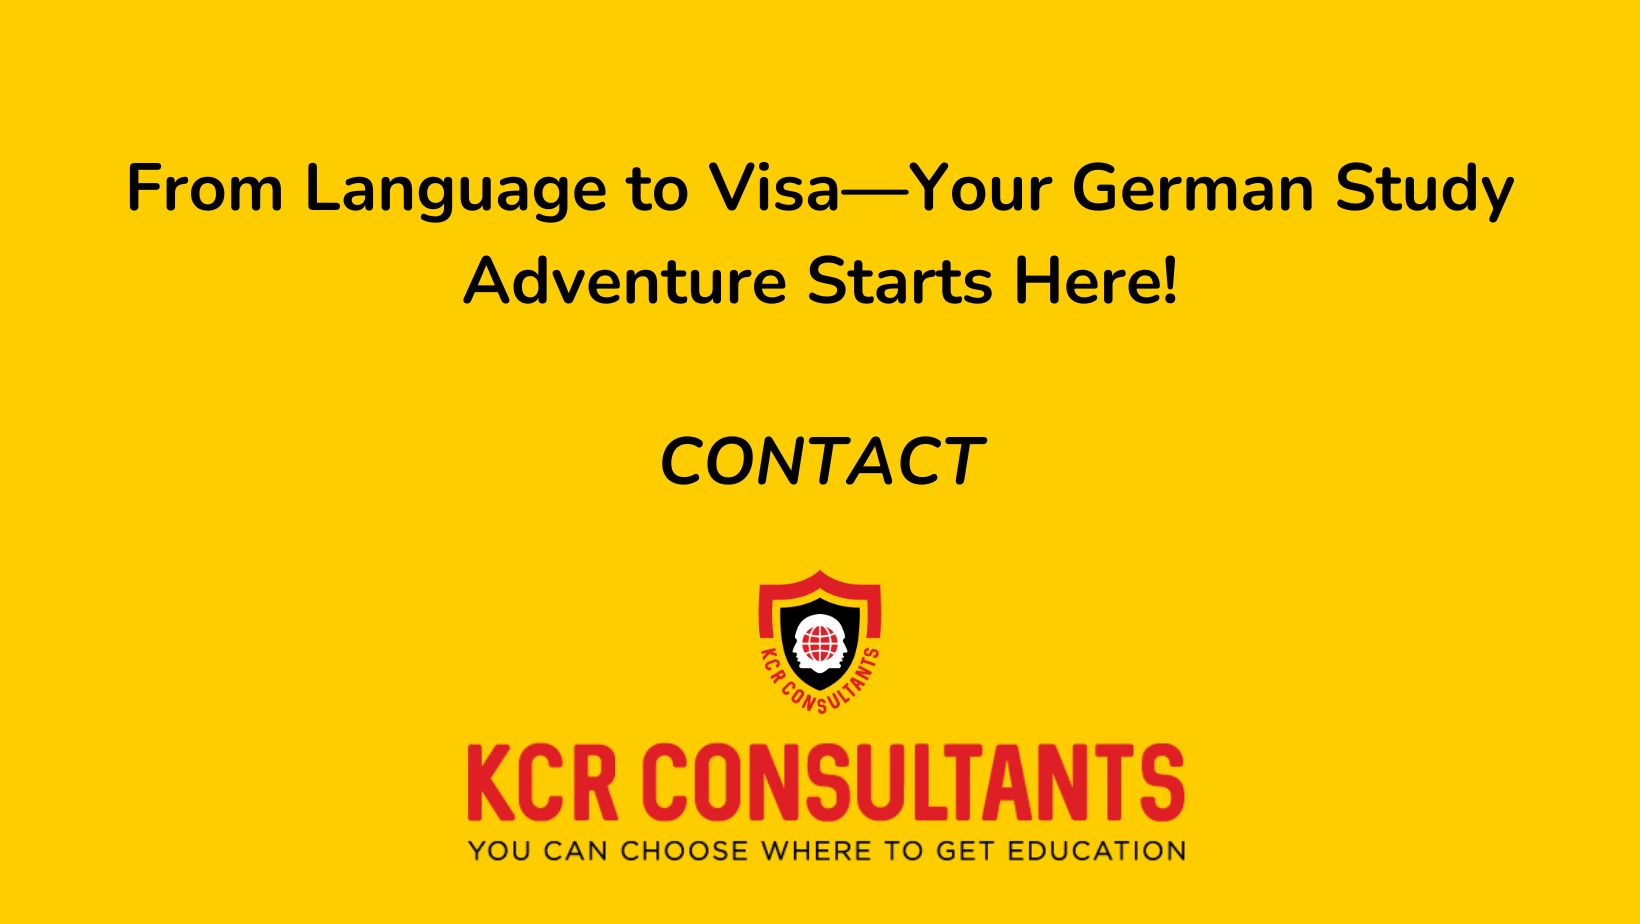 The best German education consultant - KCR CONSULTANTS - Contact Us